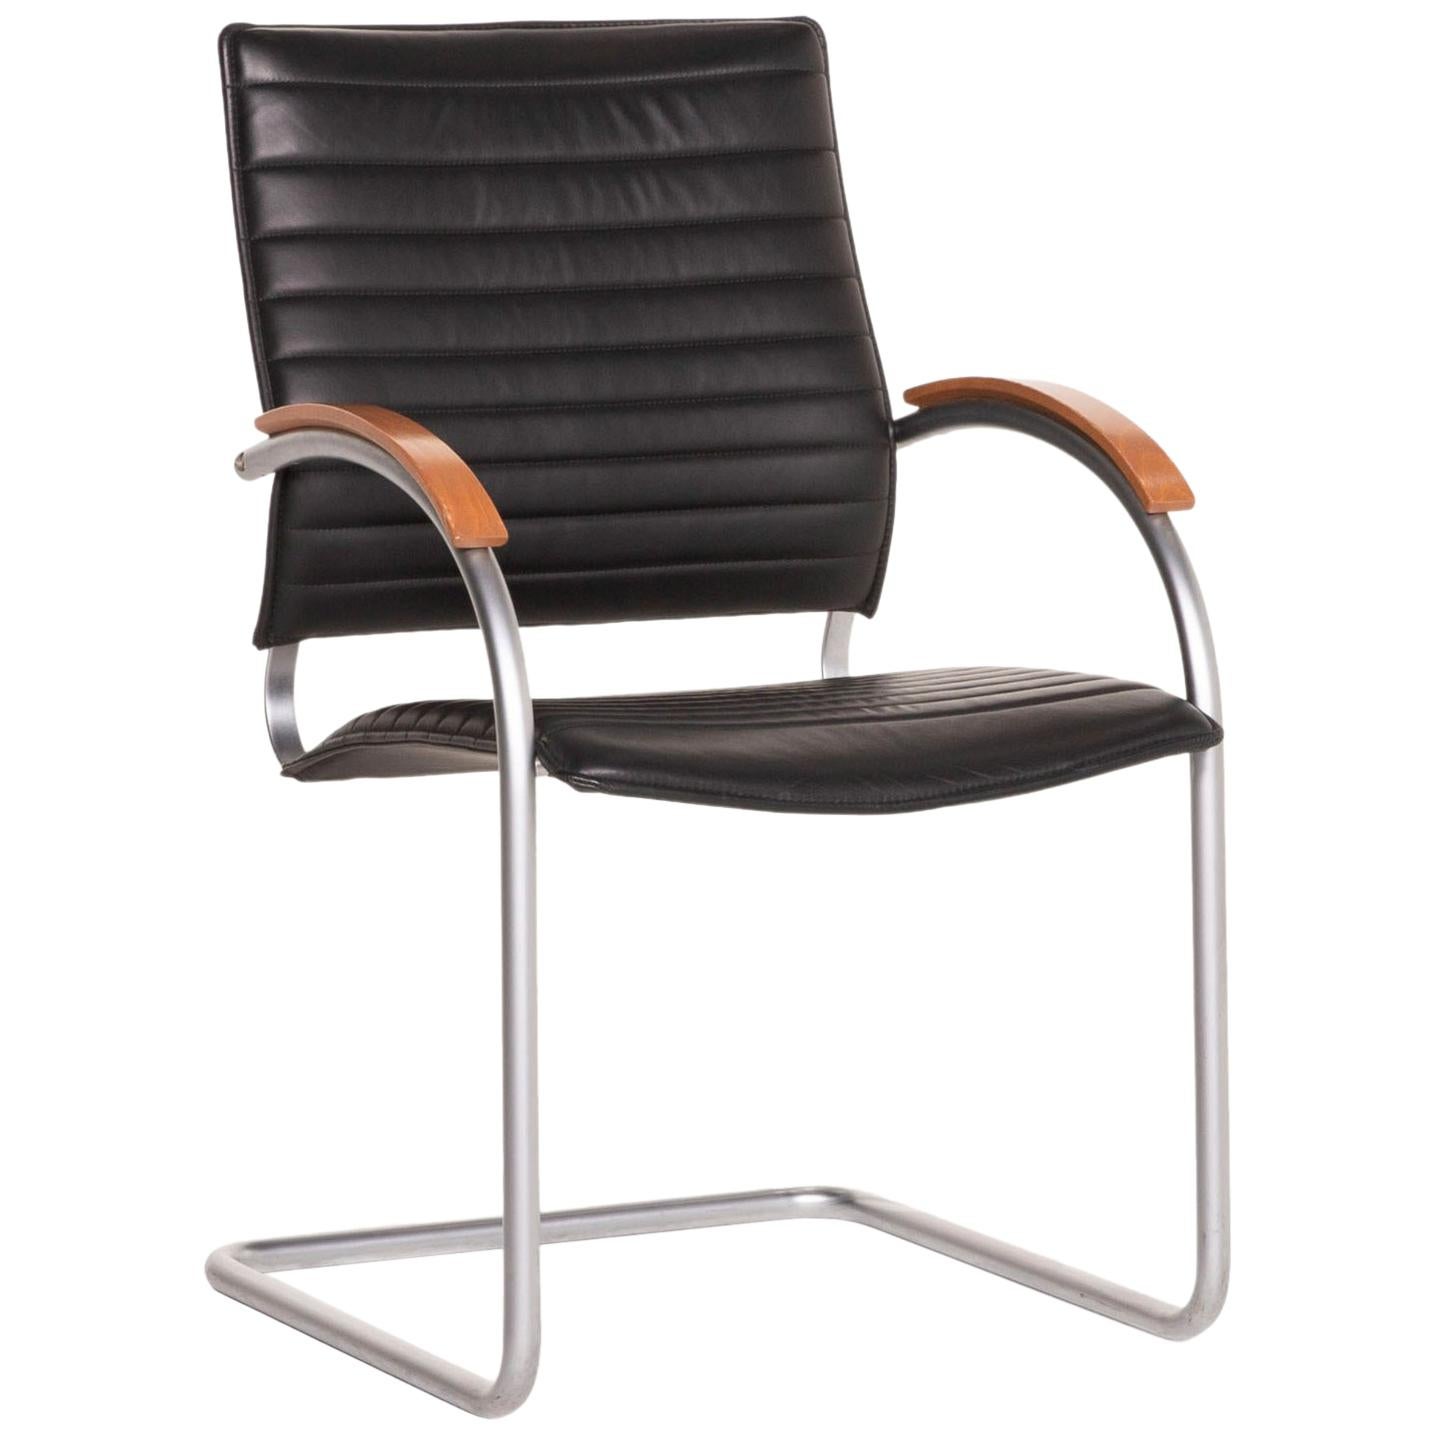 Thonet S 74 Leather Chair Black Cantilever For Sale